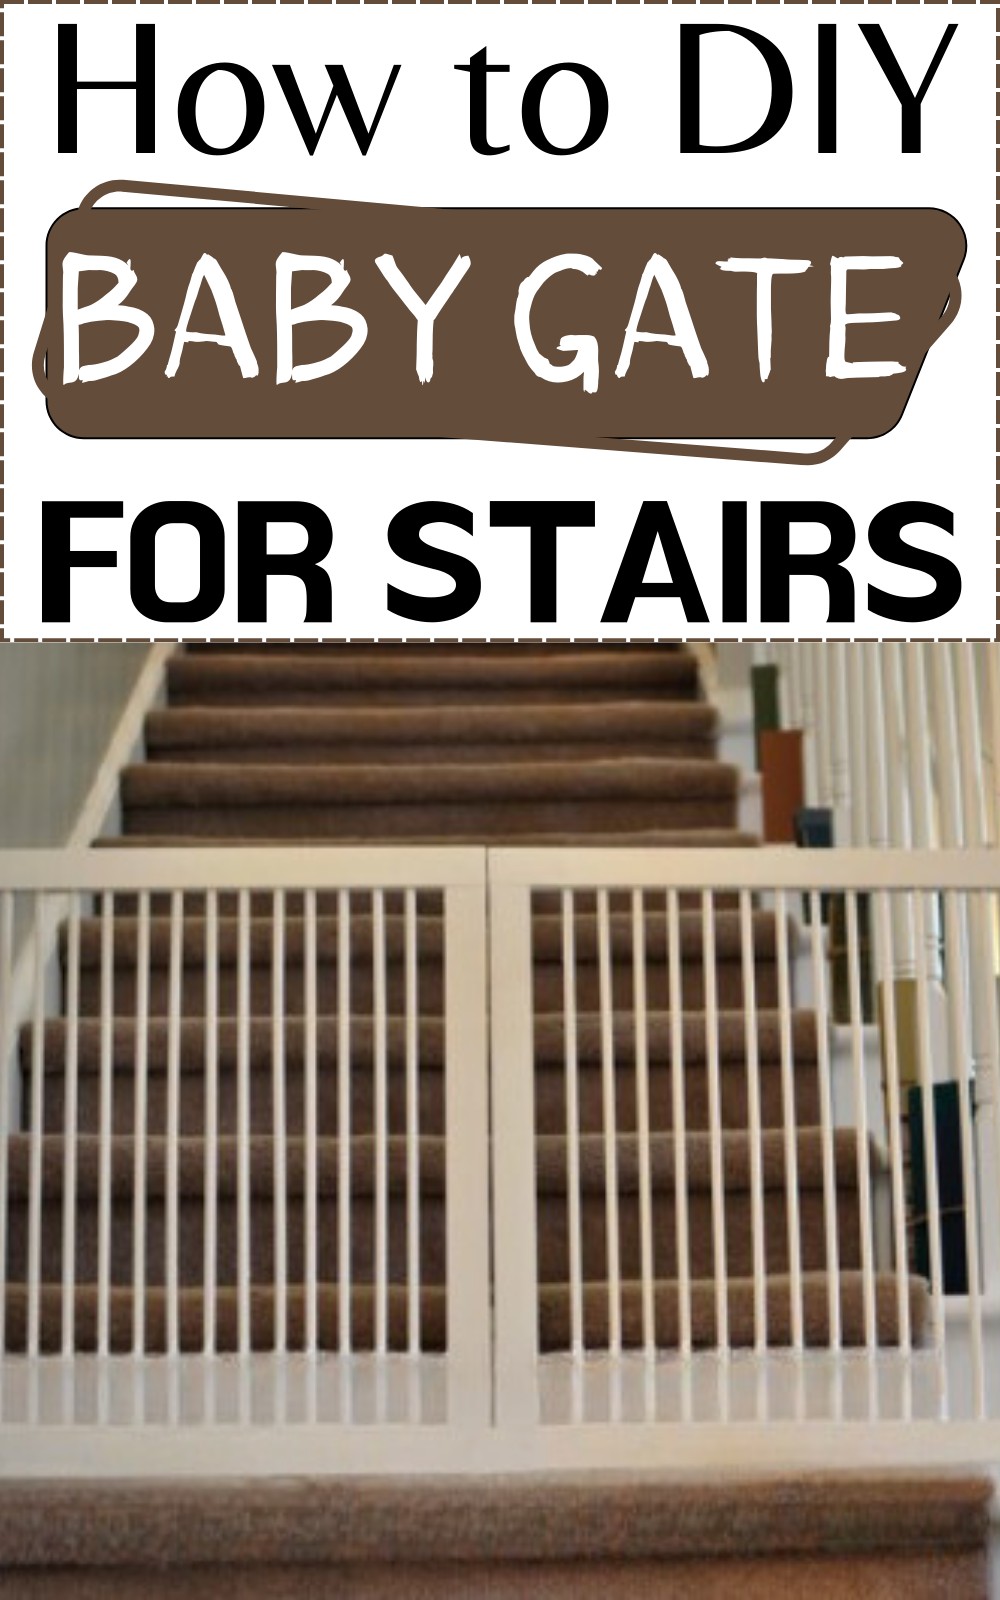 How to DIY Baby Gate For Stairs